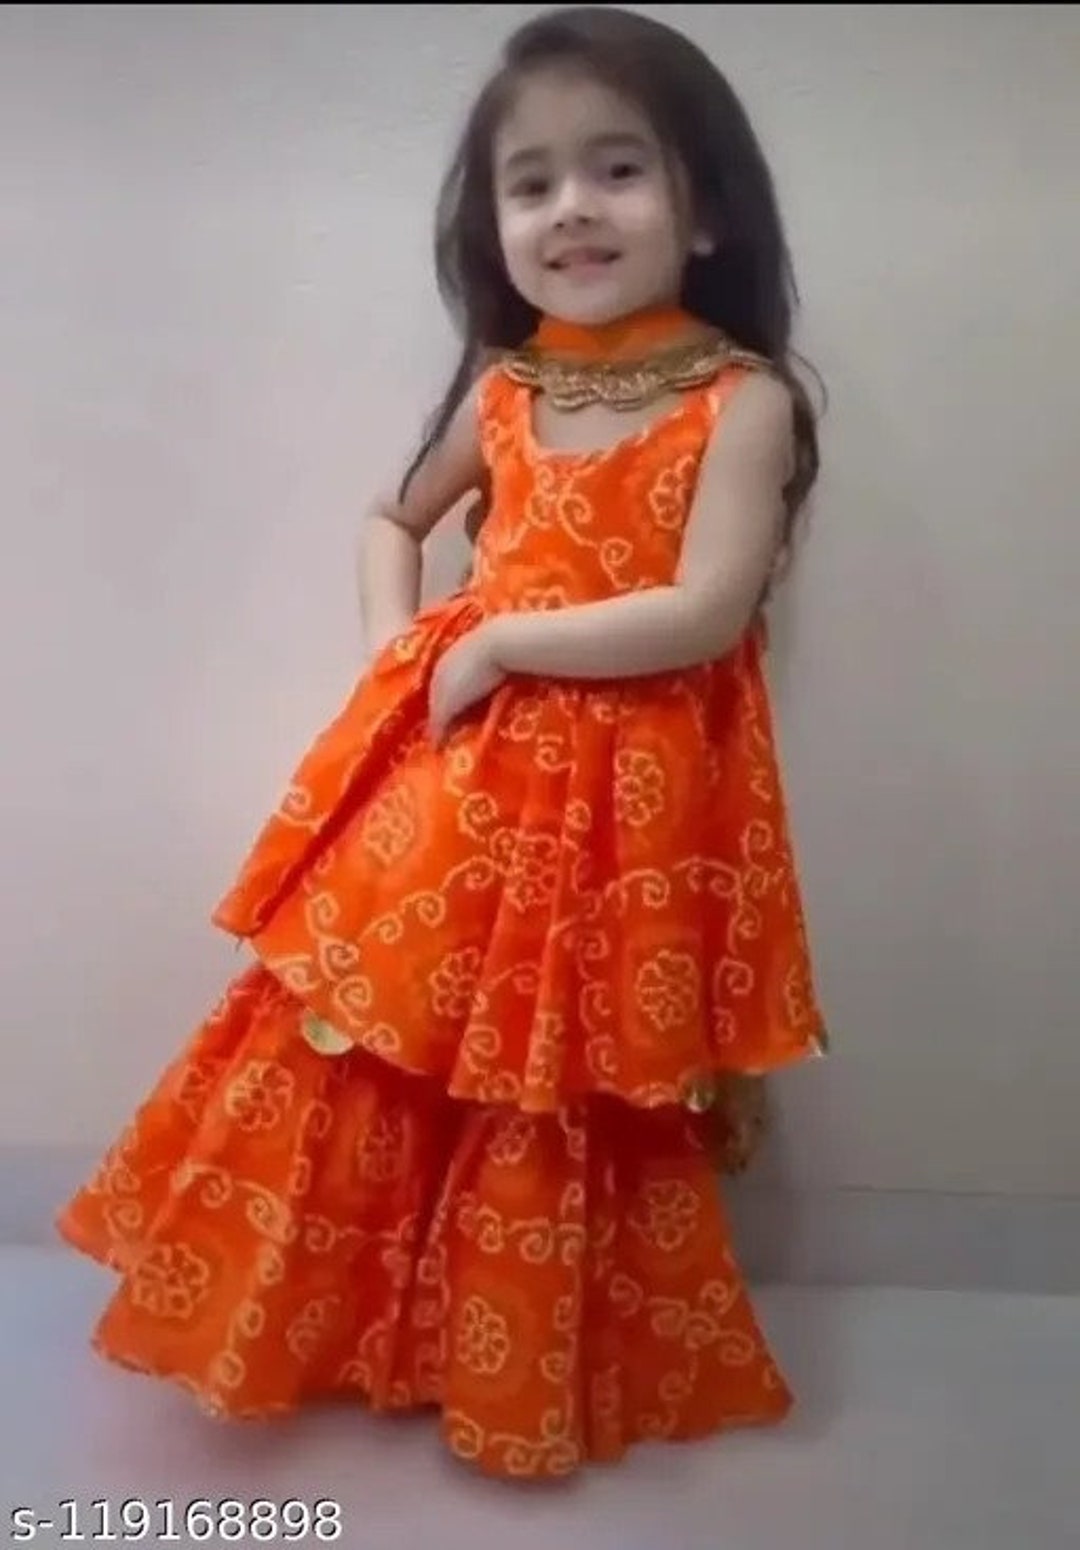 Shruti creation malad east Mumbai Moblie number 7021879060 Dhoty 18x24 |  Kids gown, Kids dress collection, Kids fashion dress